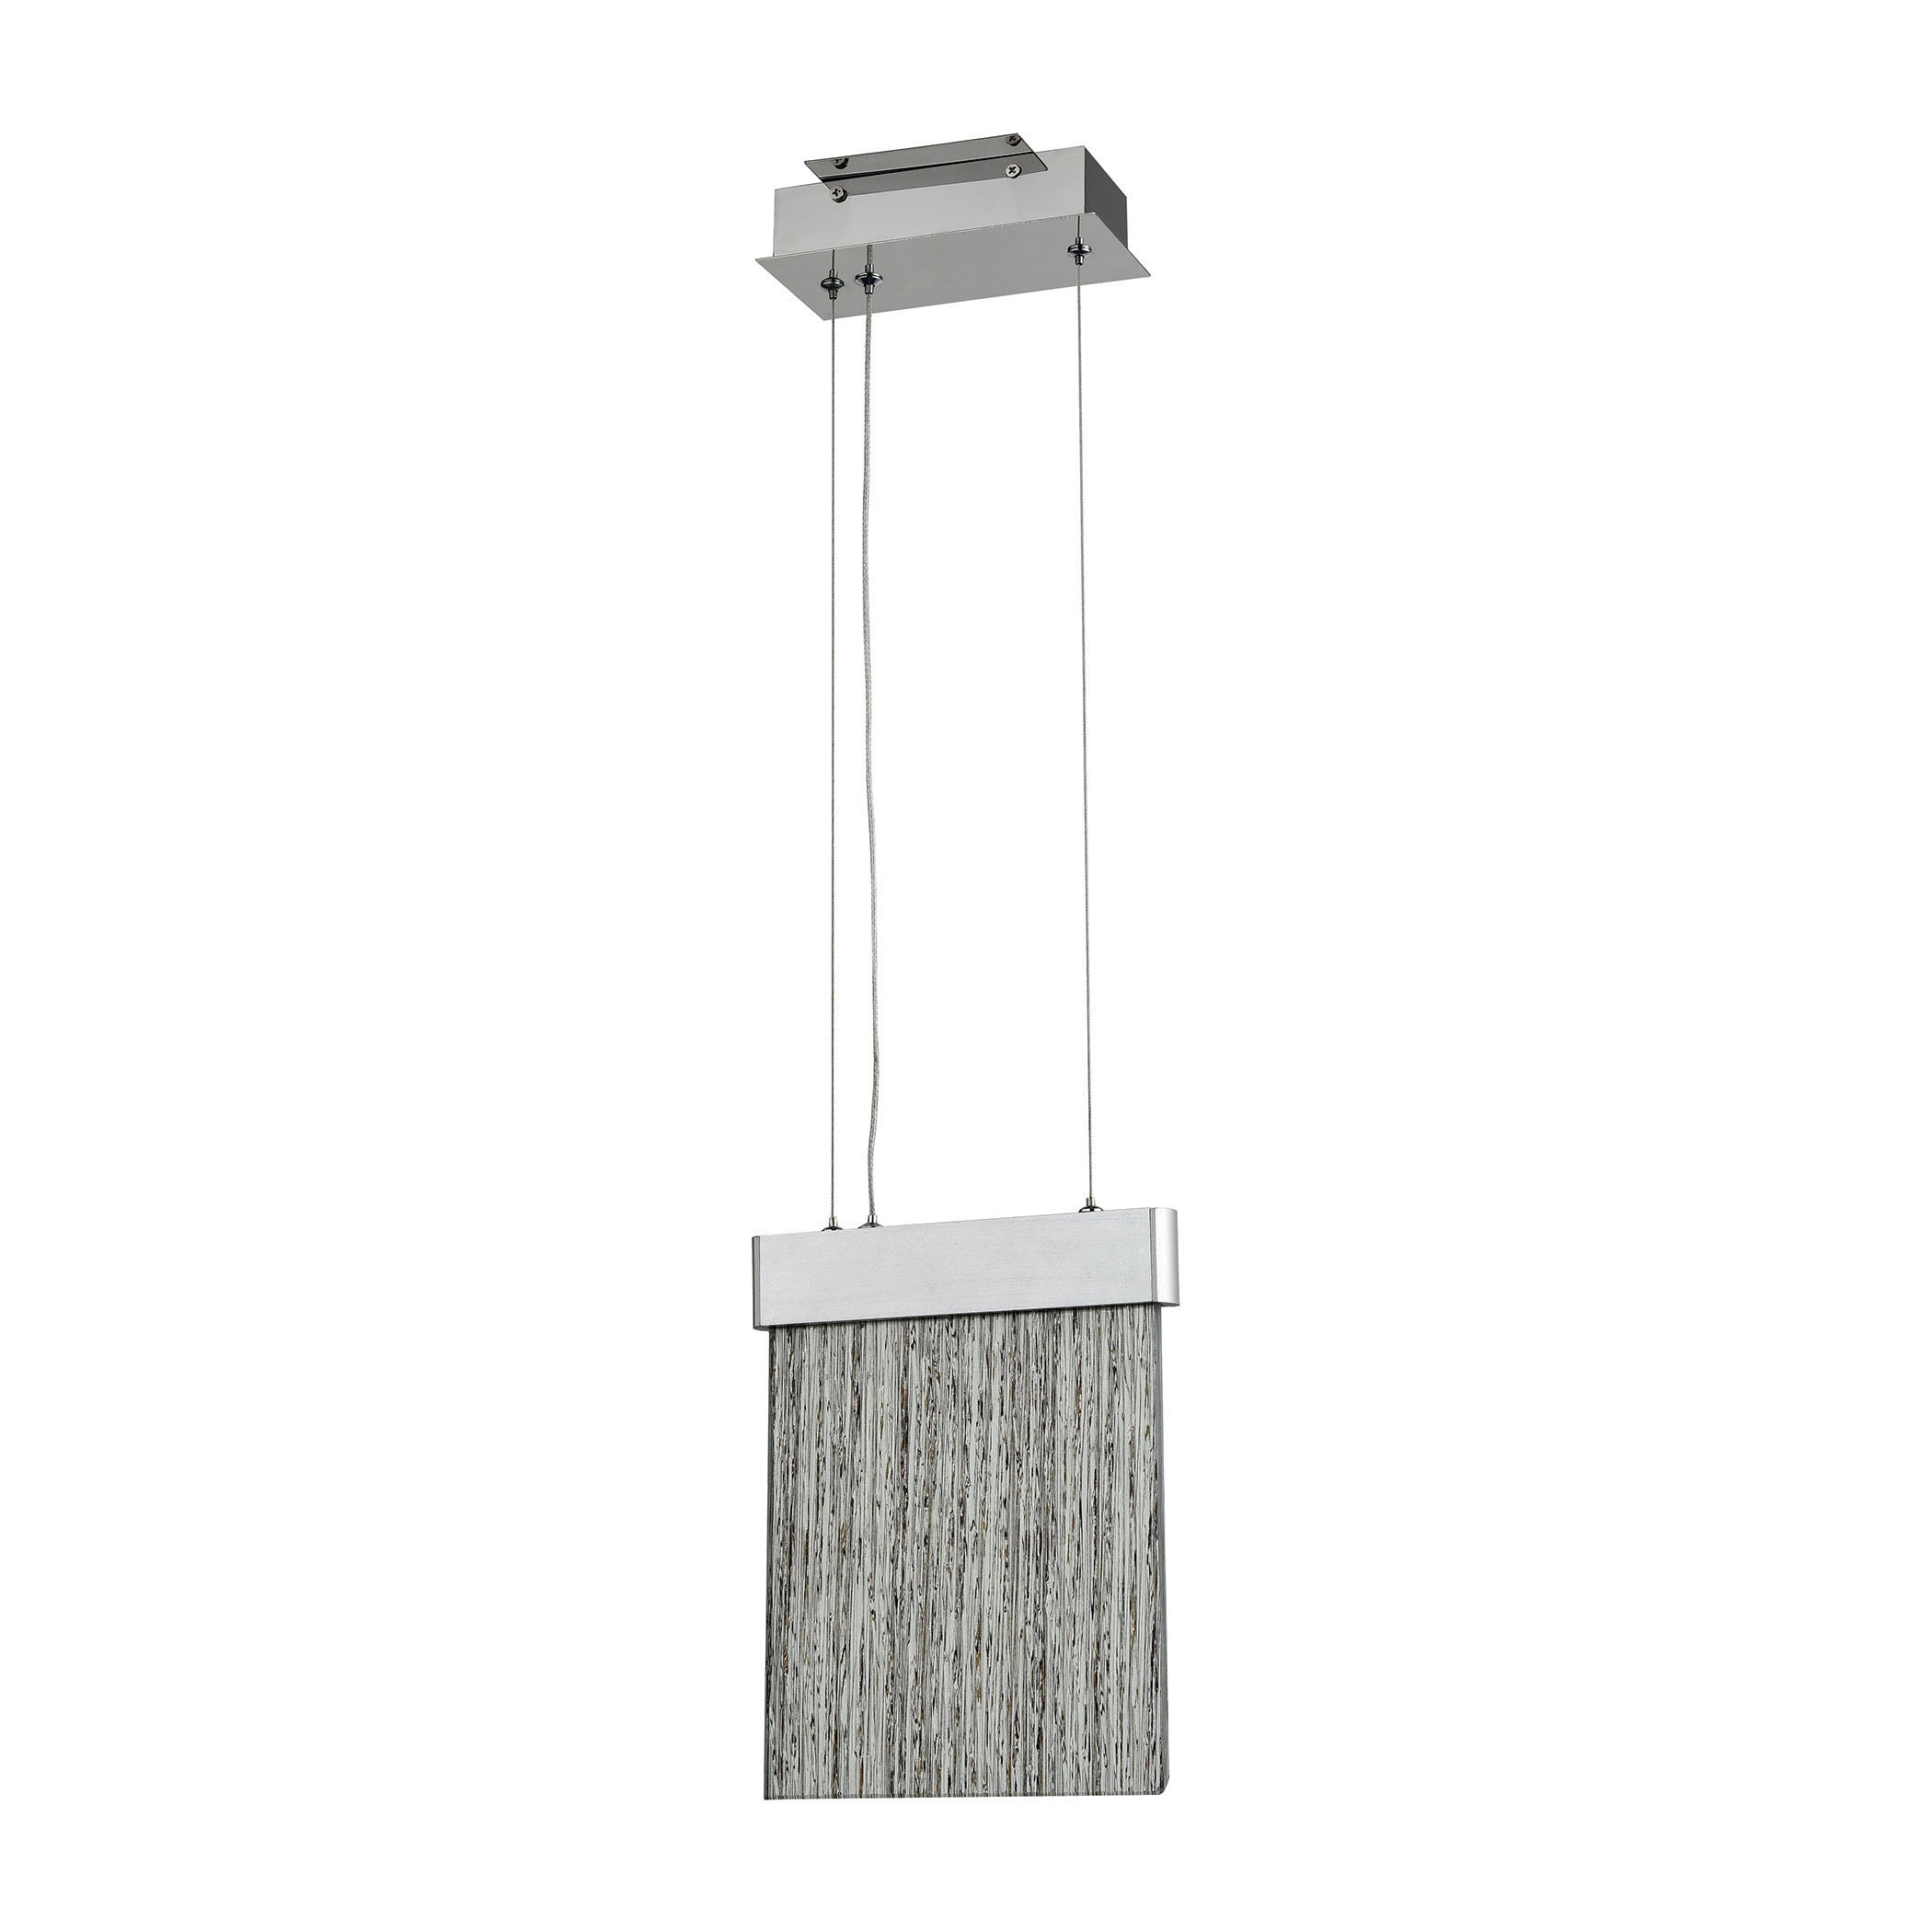 ELK Lighting 85111/LED Meadowland 1-Light Mini Pendant in Satin Aluminum and Chrome with Textured Glass - Integrated LED